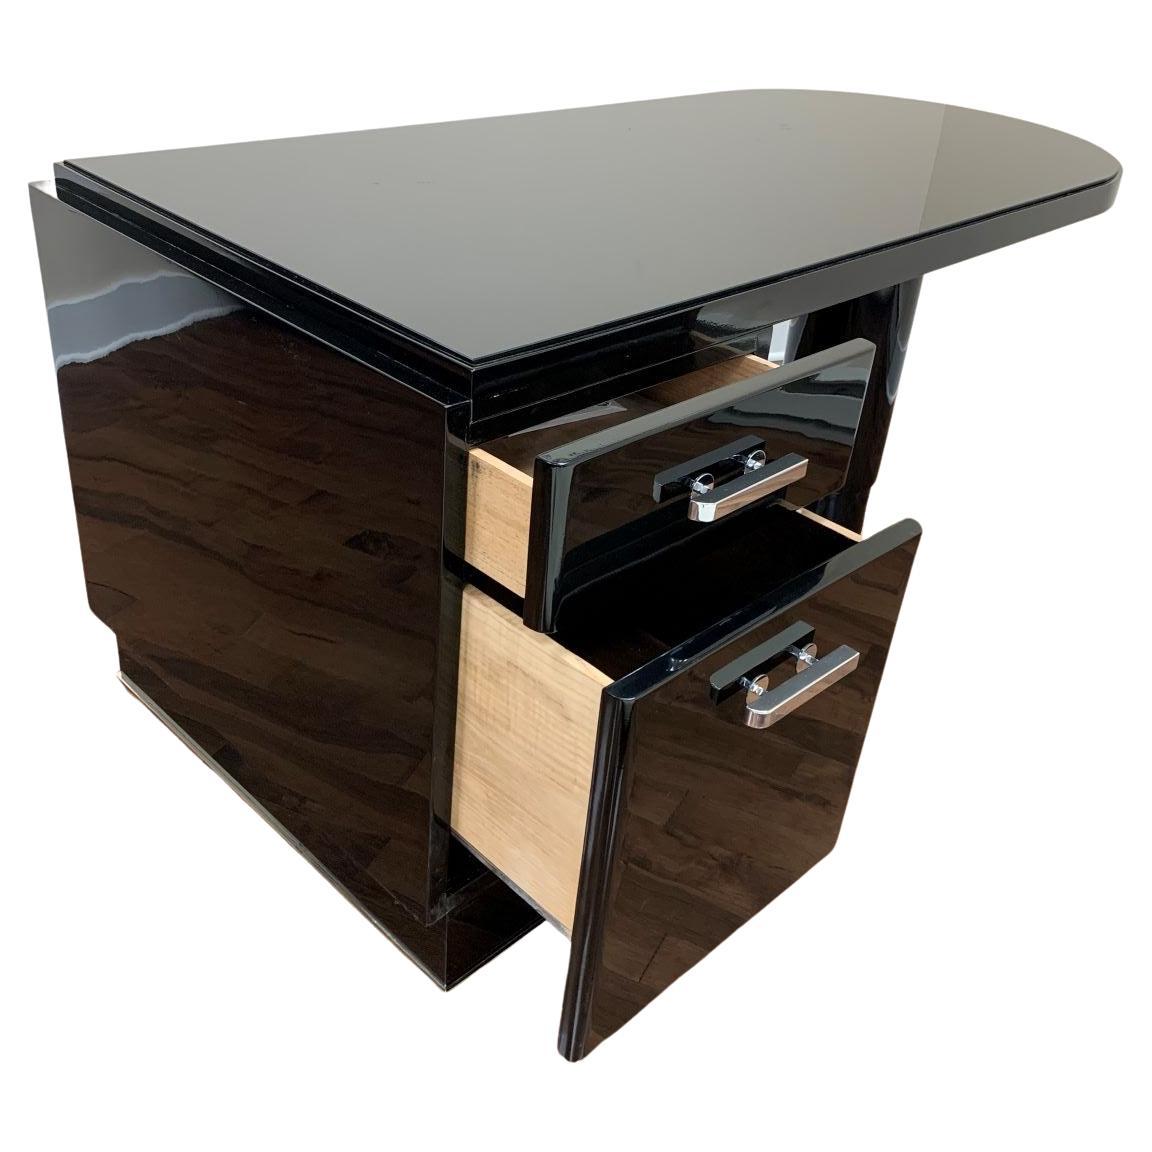 Remarkable French Art Deco Streamline executive desk. Simple chrome accents on the base complements the elegant design. The asymmetric design features a drawer bank with a file drawer opposite a stately cylinder leg. The top is black glass for